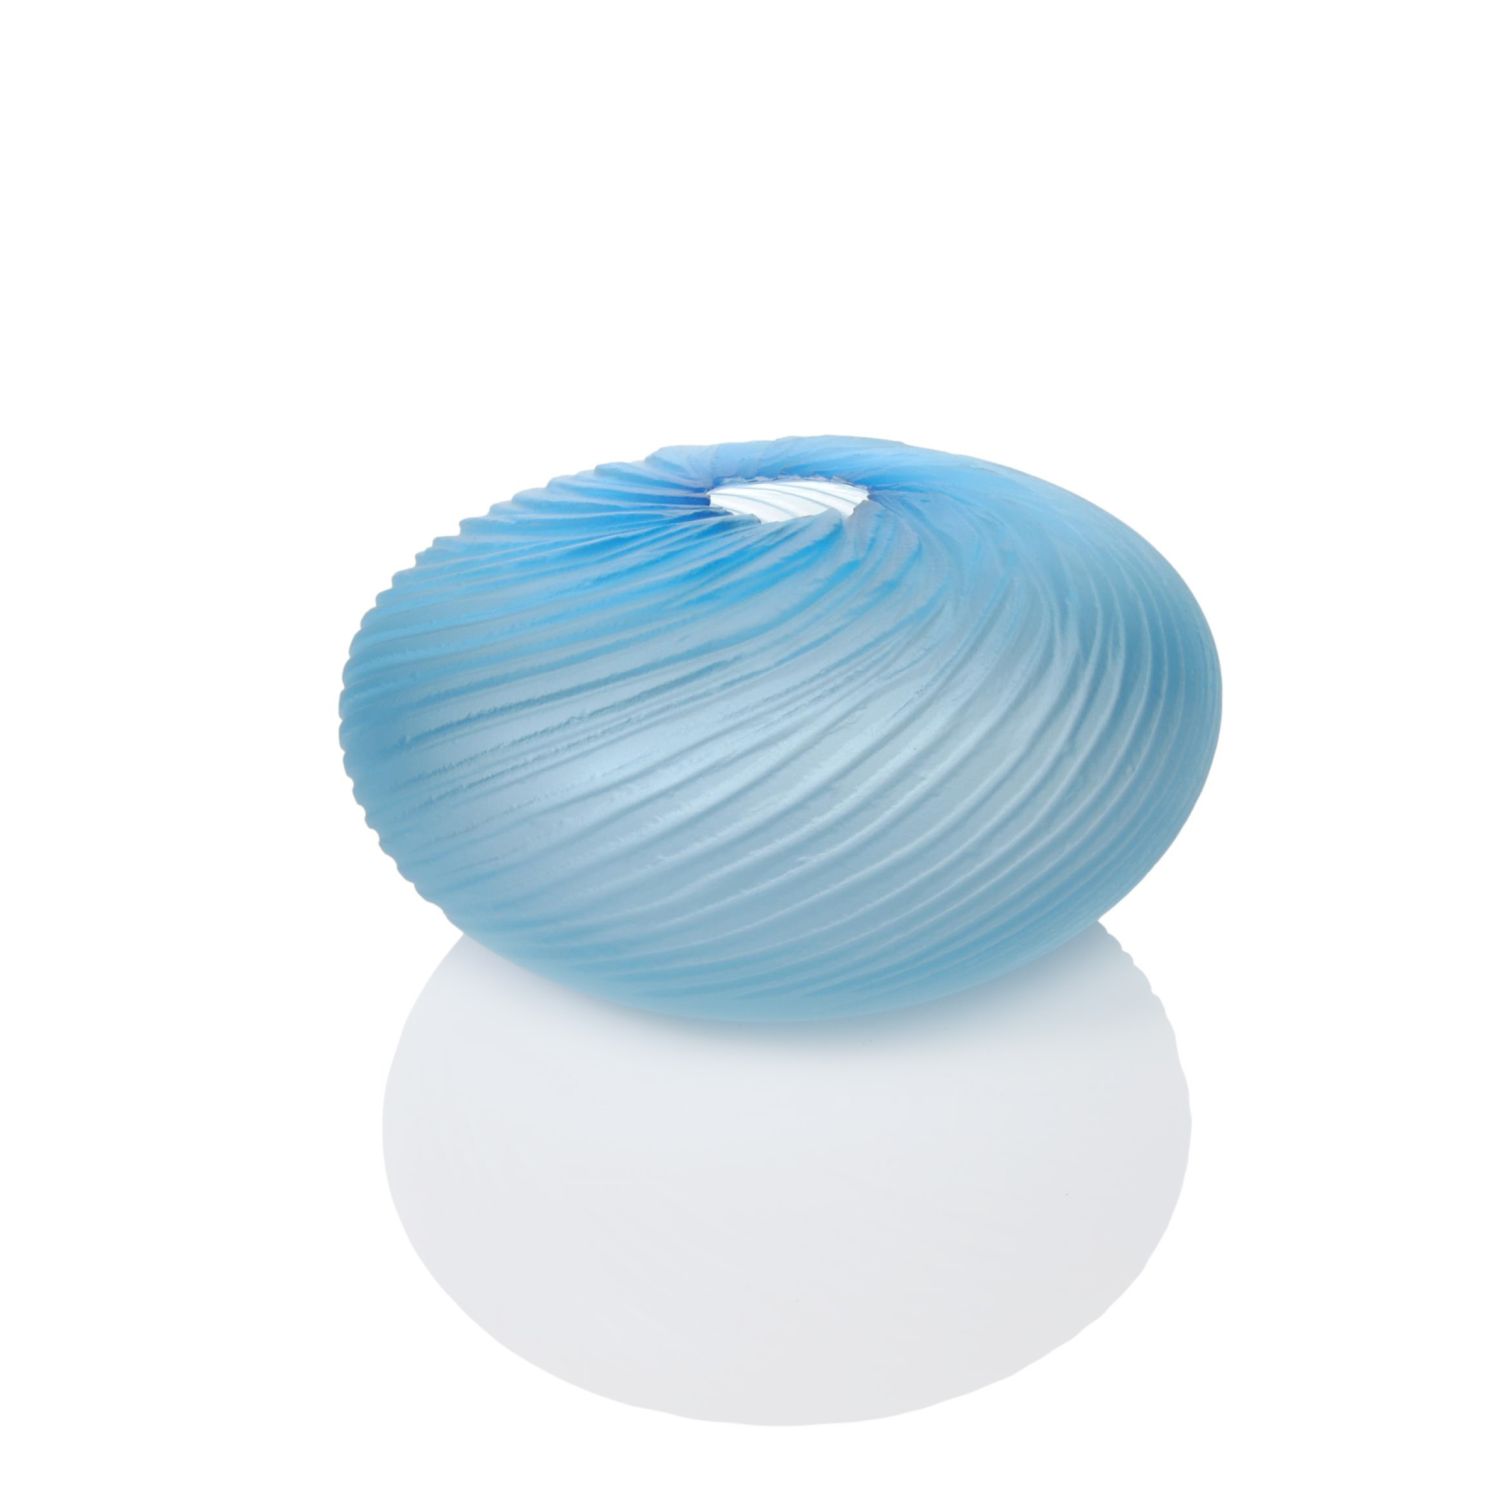 Courtney Downman: Aqua Saw Carved Glass Wave Bowl Product Image 1 of 1